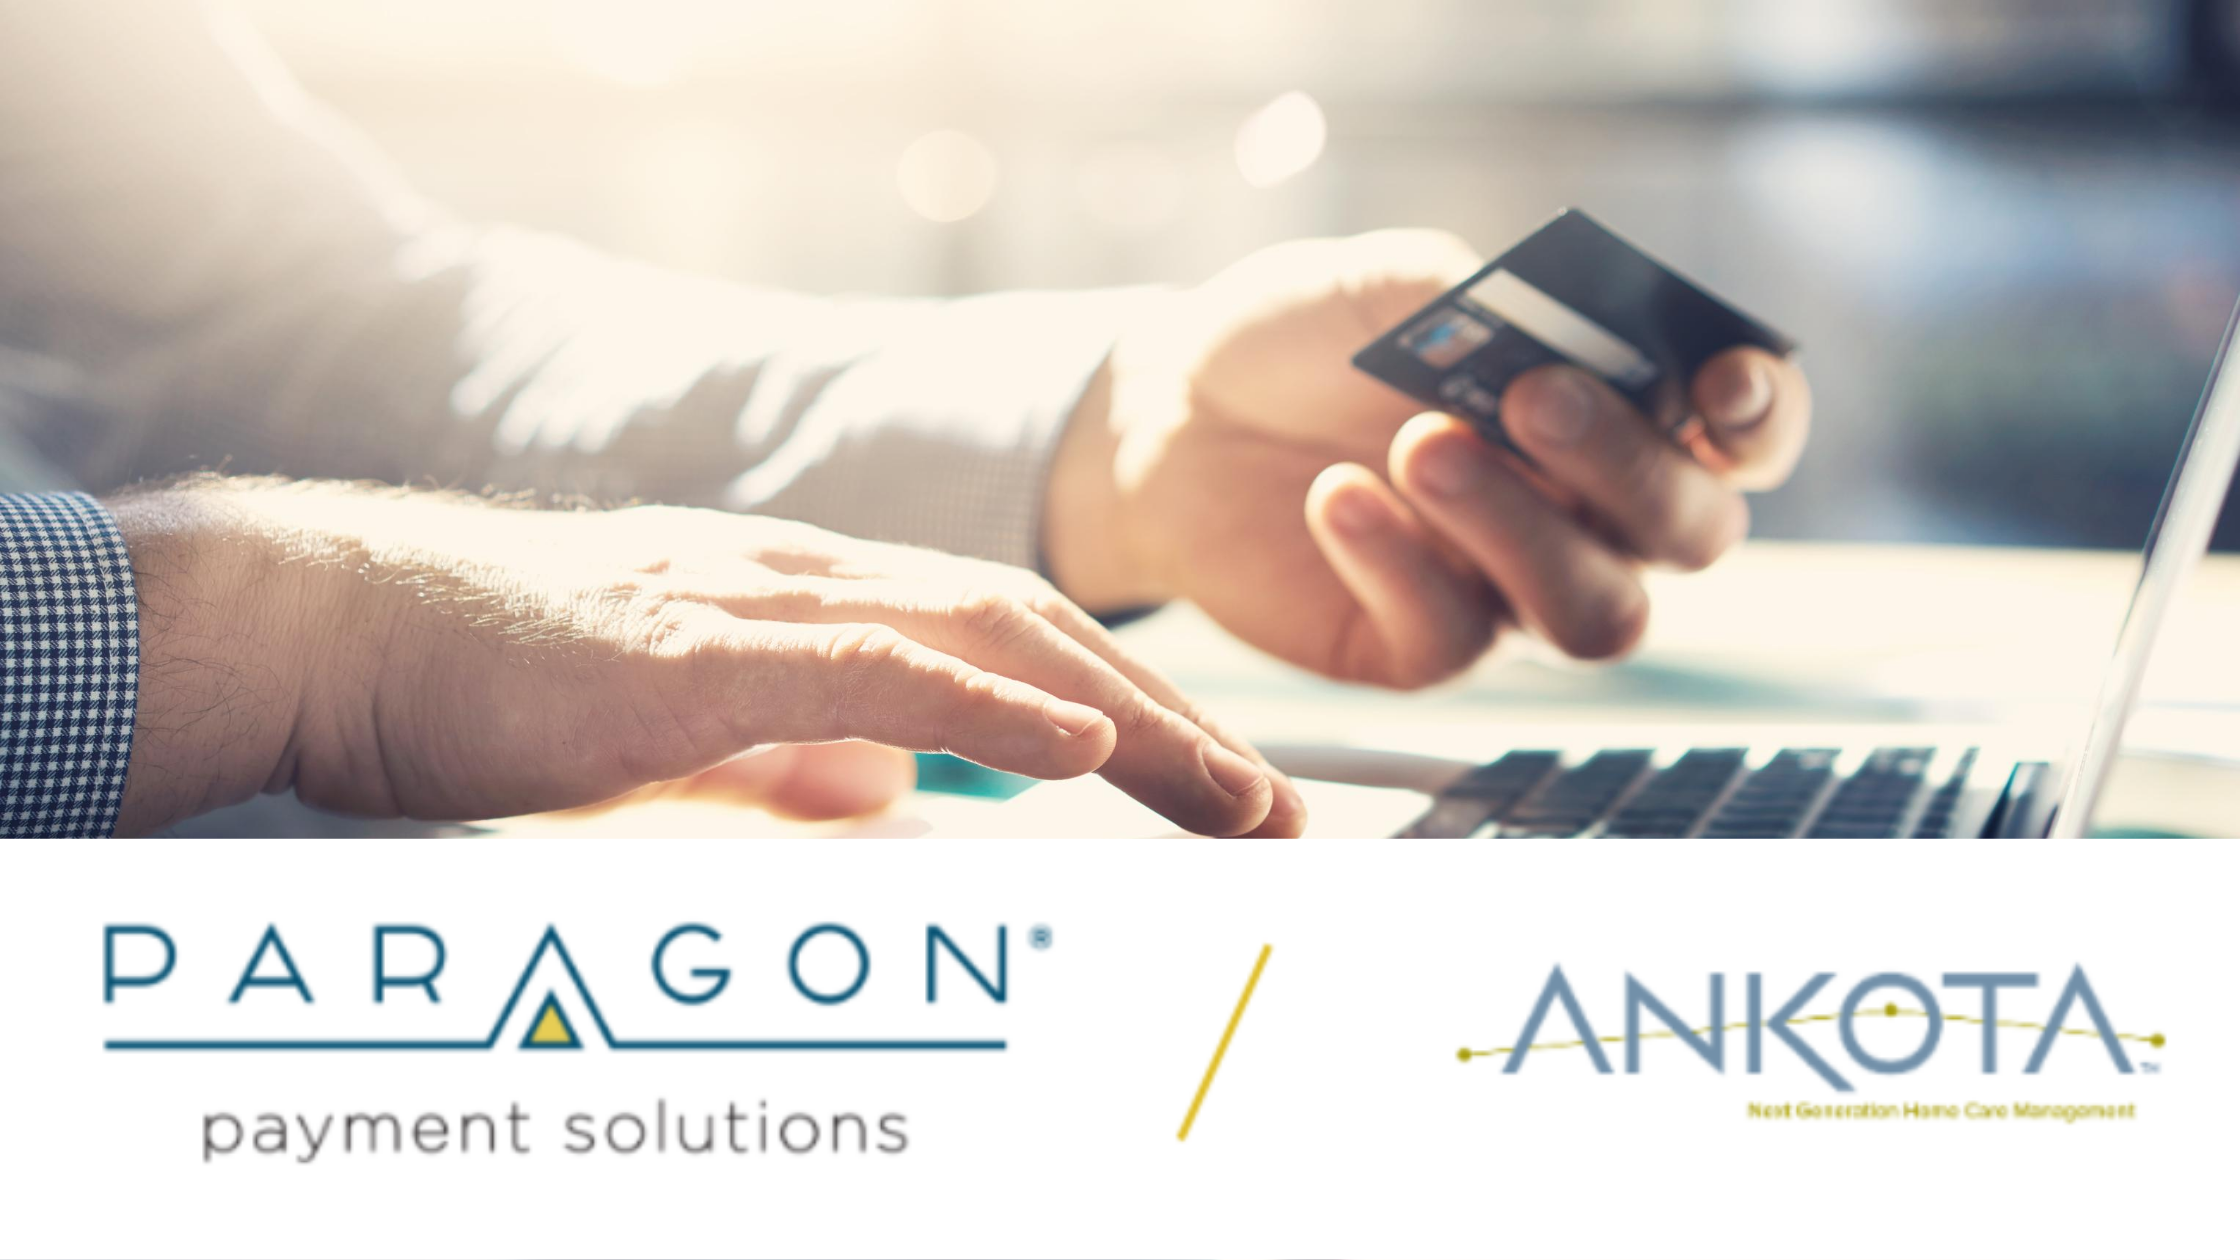 Paragon Payment Solutions Ankota 